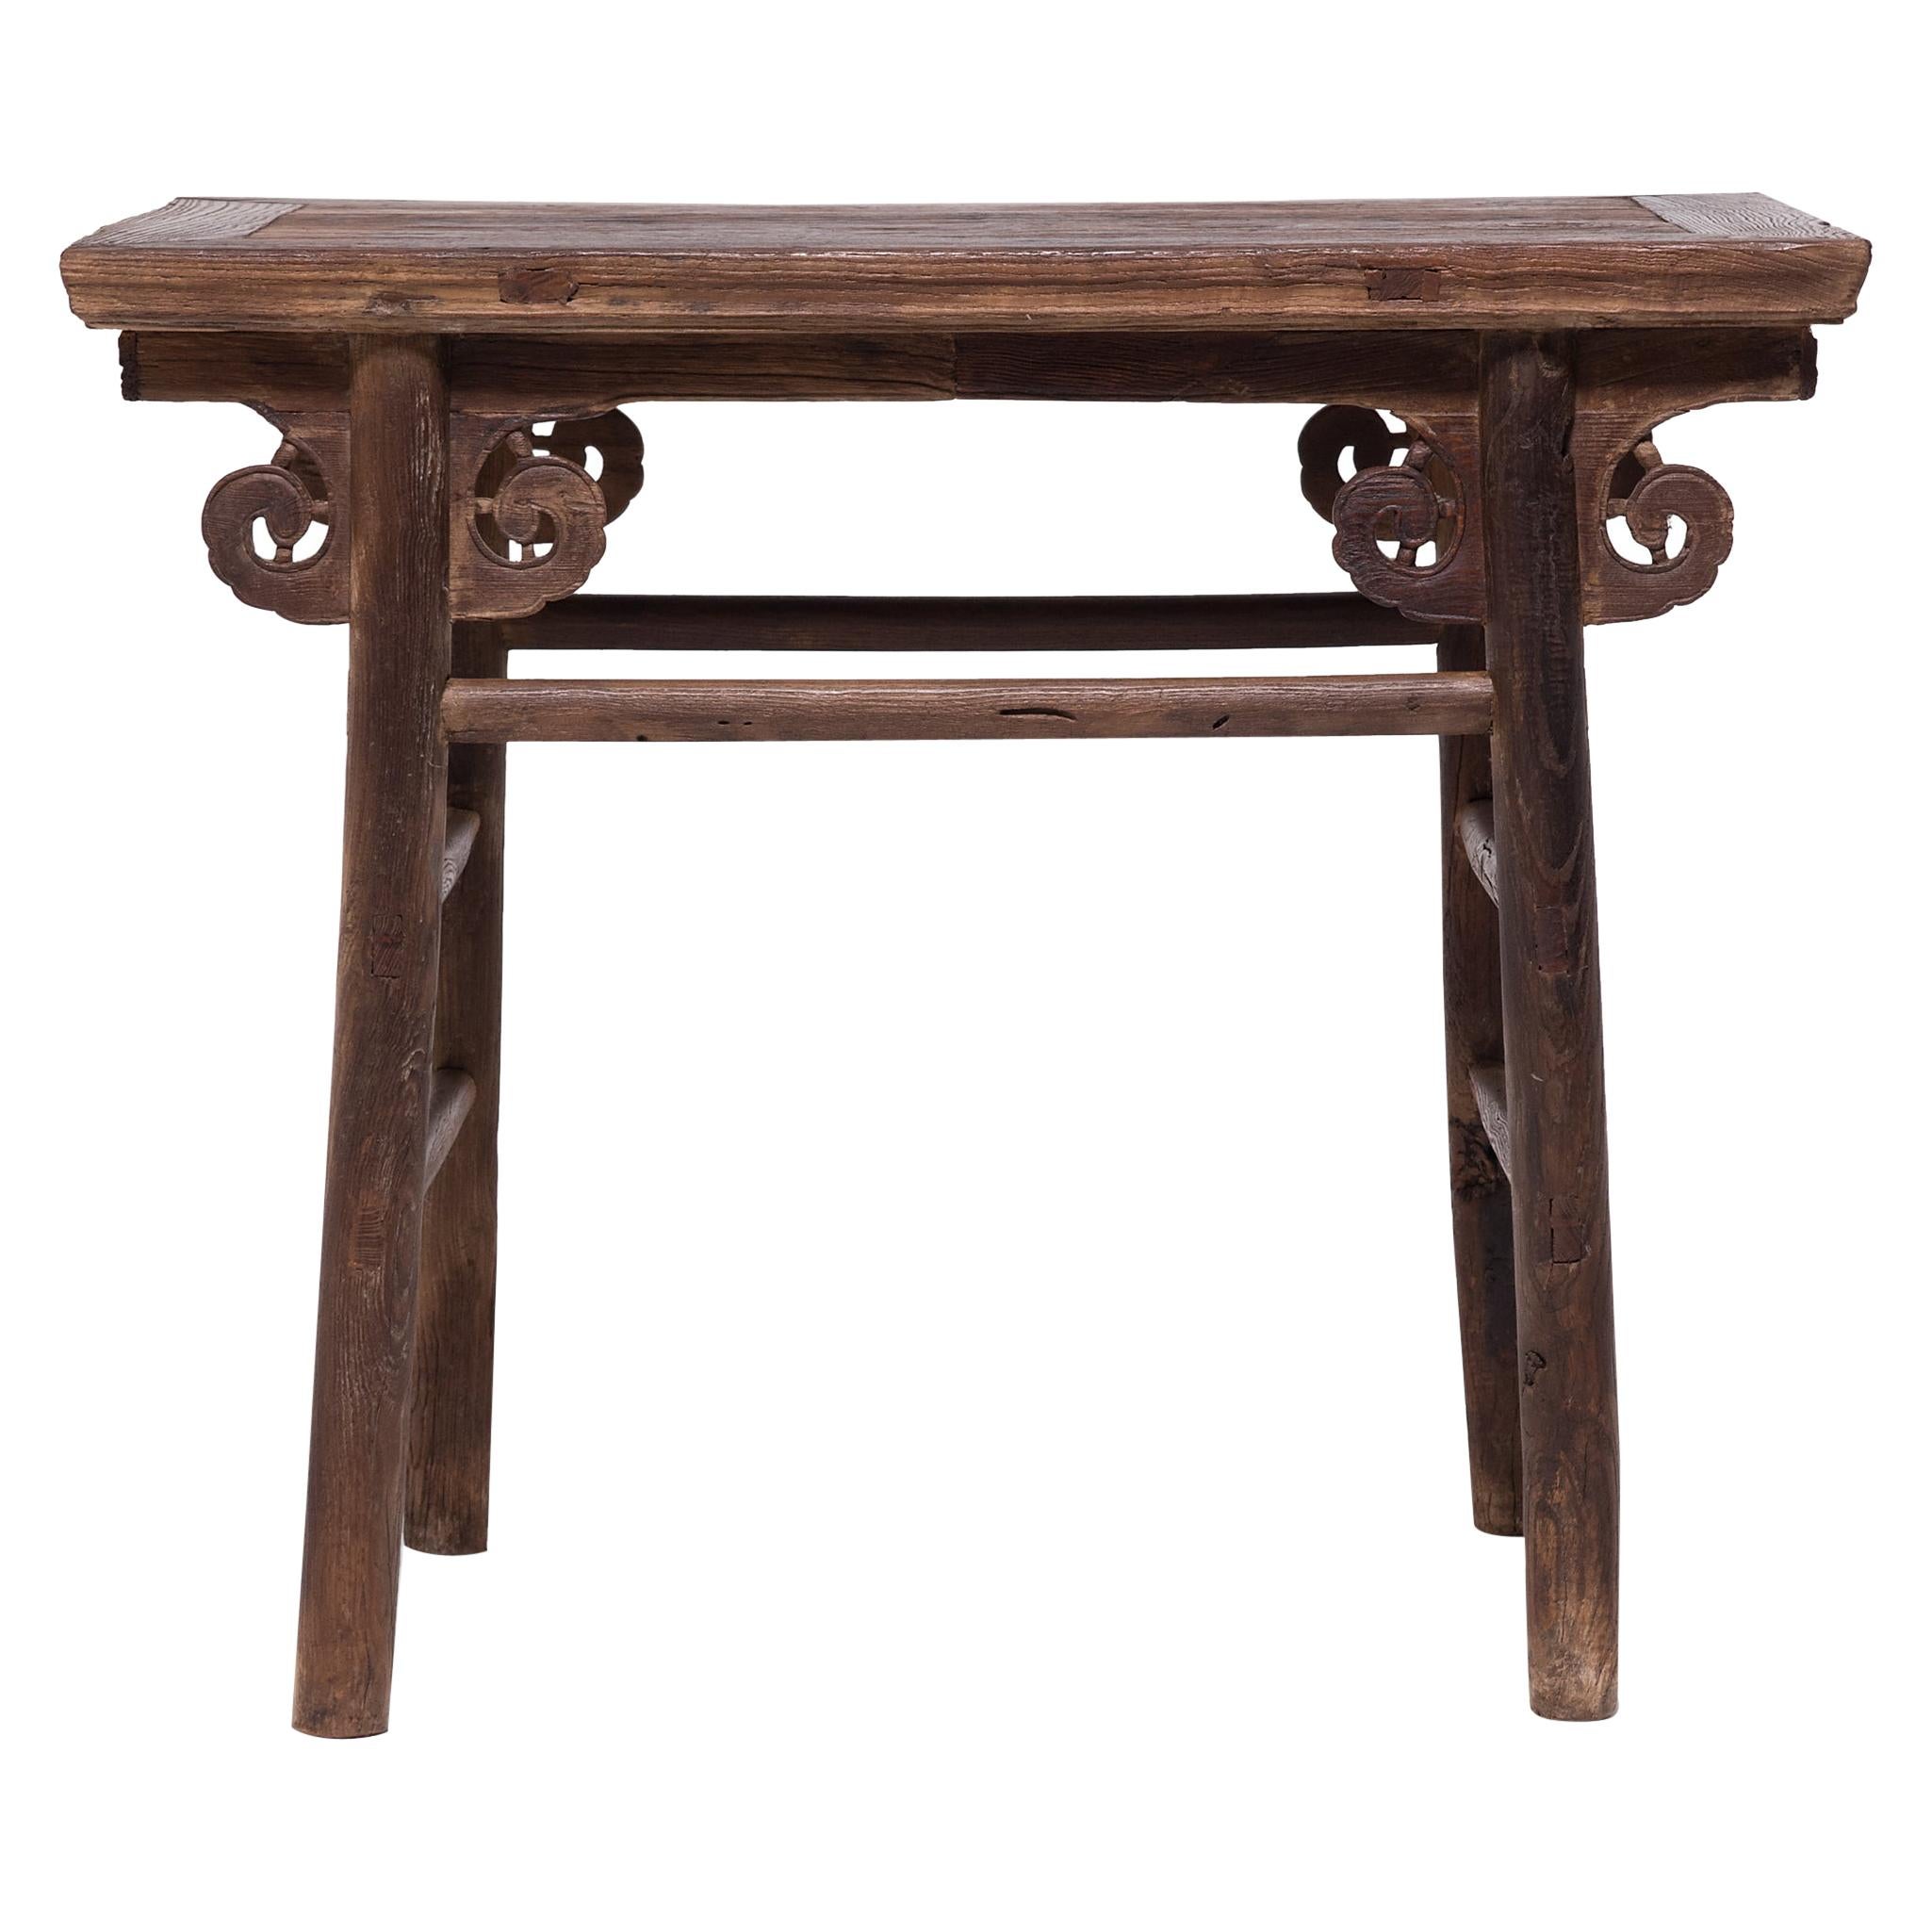 Chinese Wine Table with Cloud Spandrels, c. 1750 For Sale